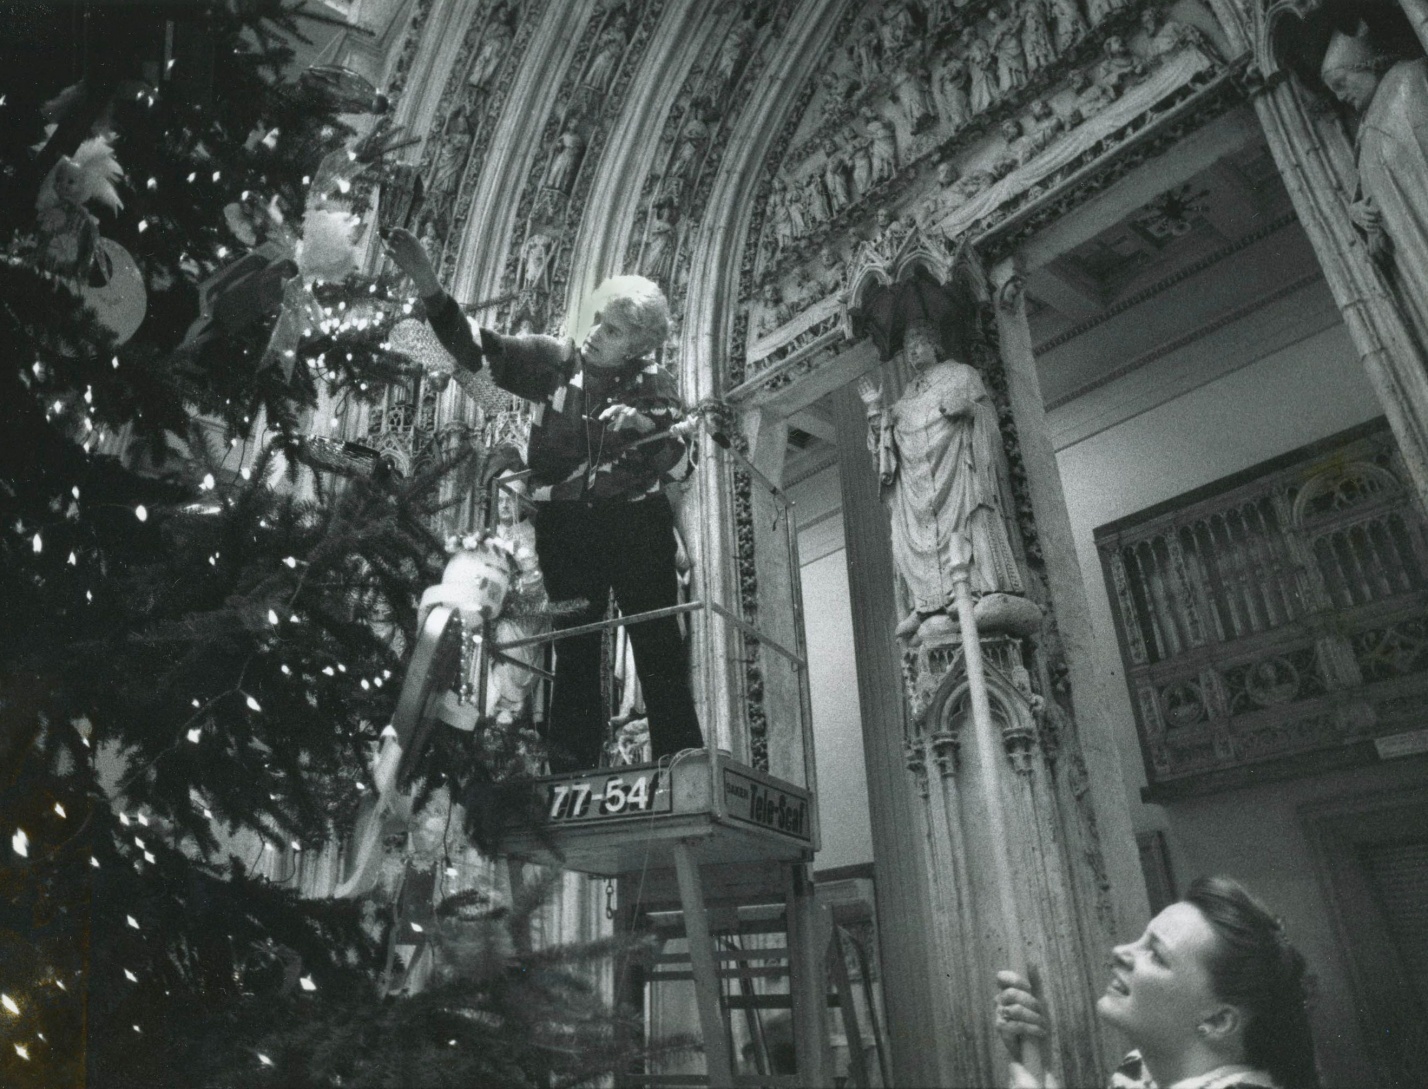 A photo of a woman on an industrial lift decorating trees.